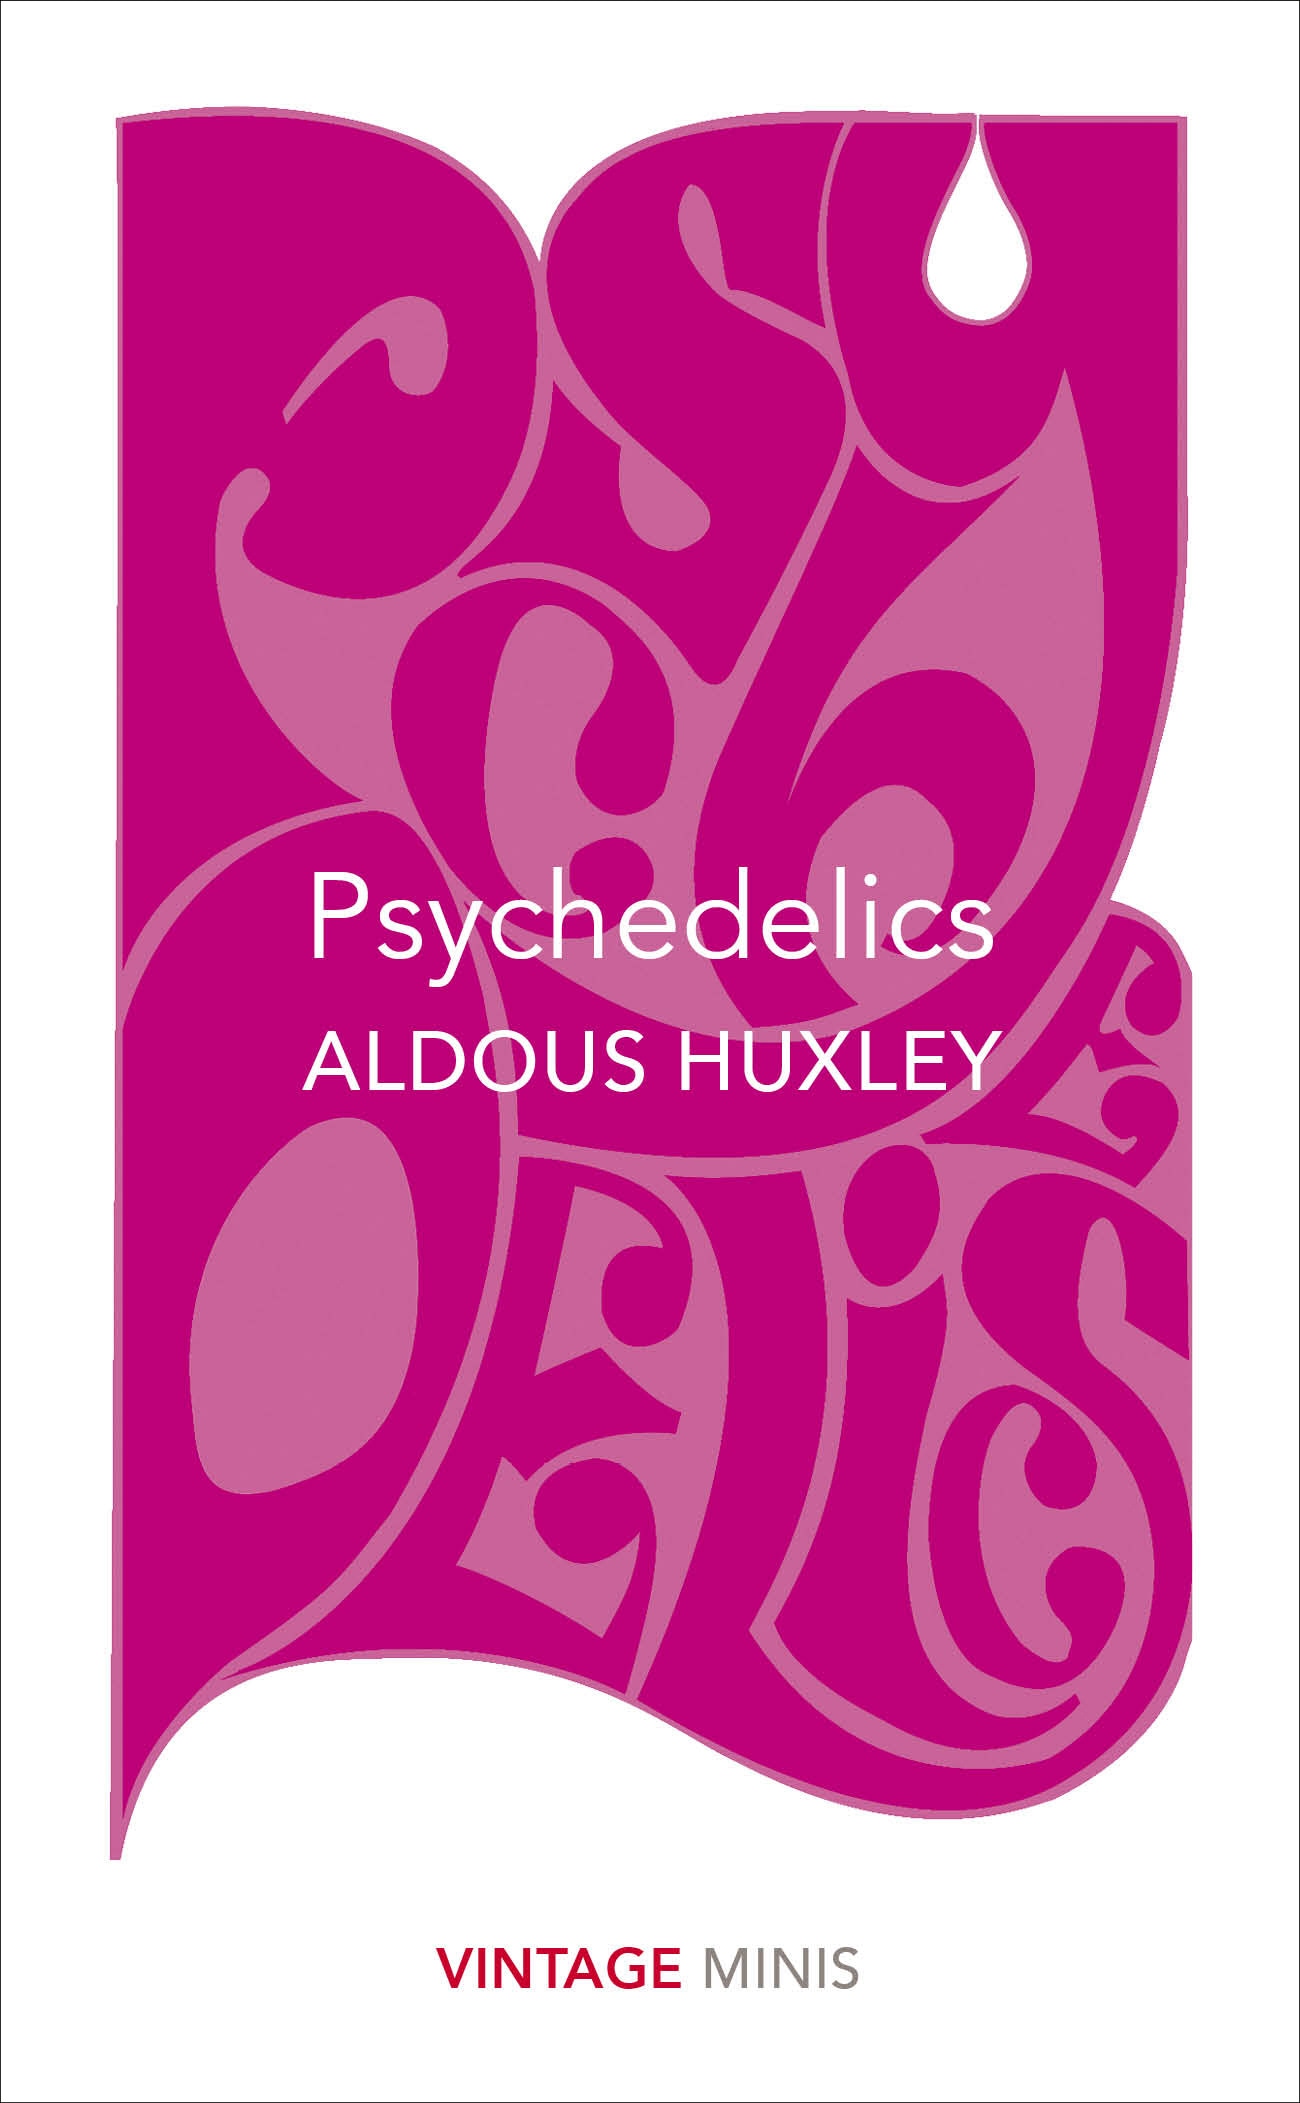 Book “Psychedelics” by Aldous Huxley — June 8, 2017